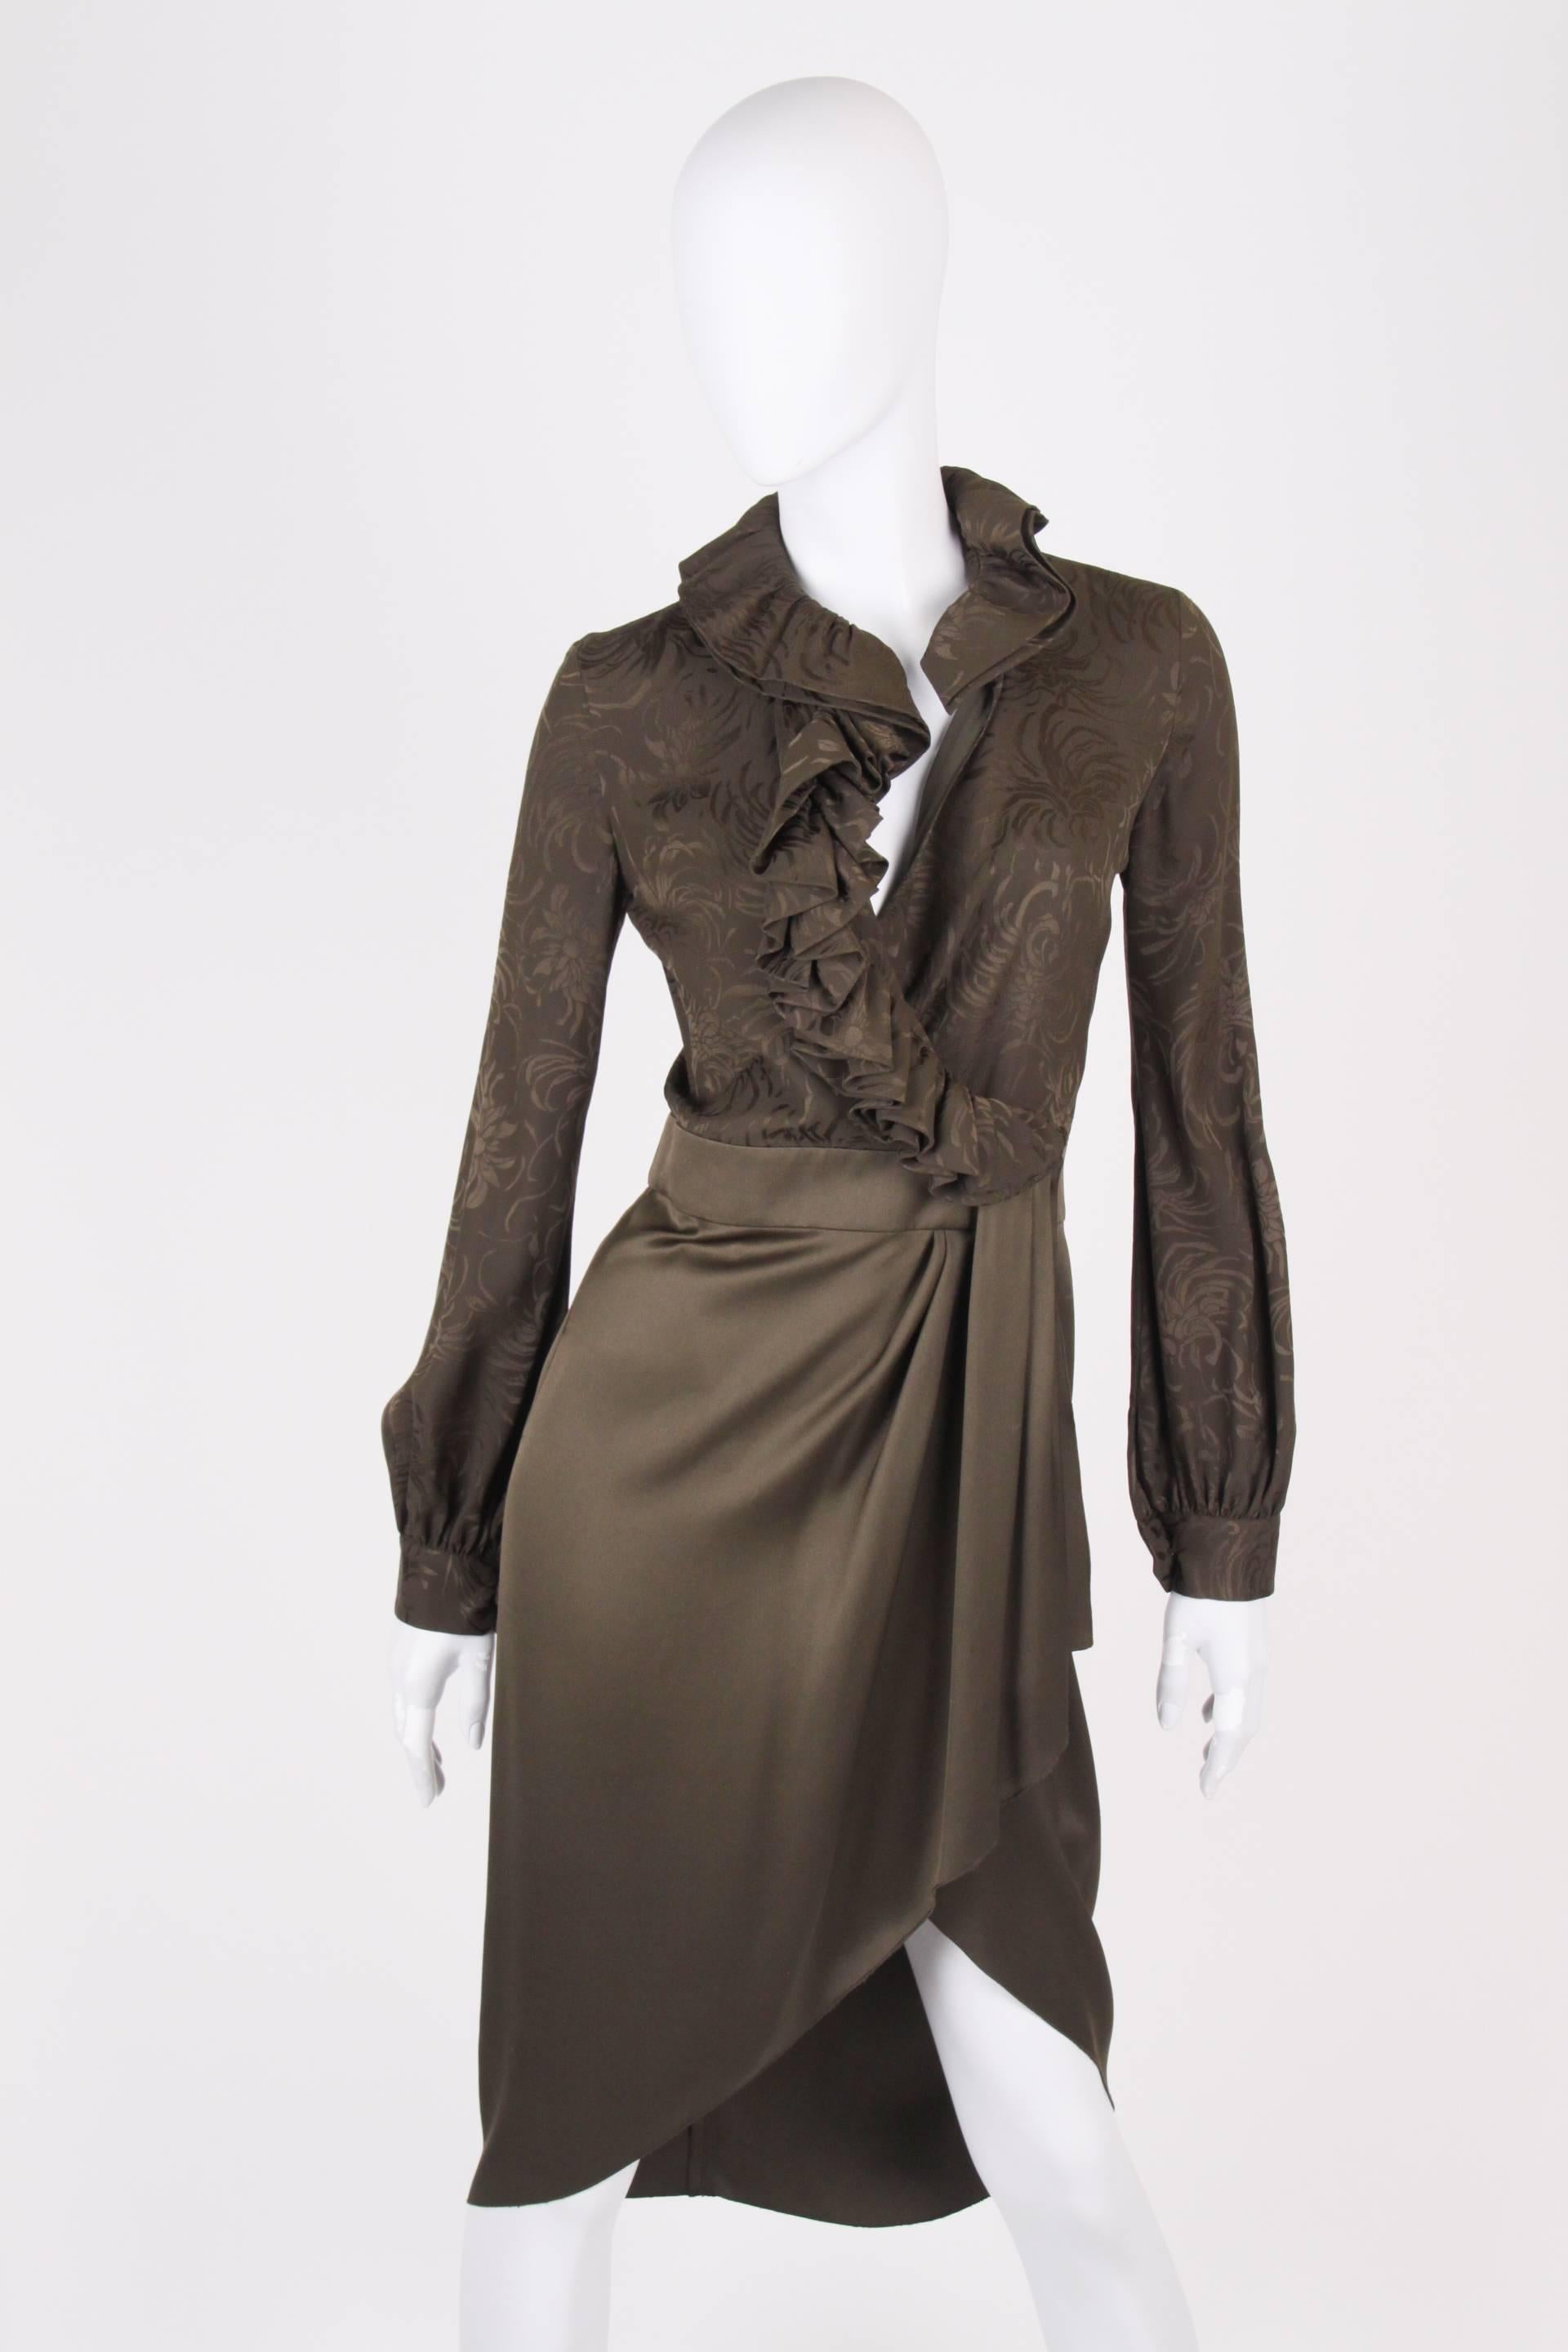 This is one of our favorites! A silk wrap dress by Gucci in army green from the 2012 fall collection.

This lightweight dress has no lining. Long sleeves and a round double layered ruffle collar. The fabric of the upper part of the dress has a woven